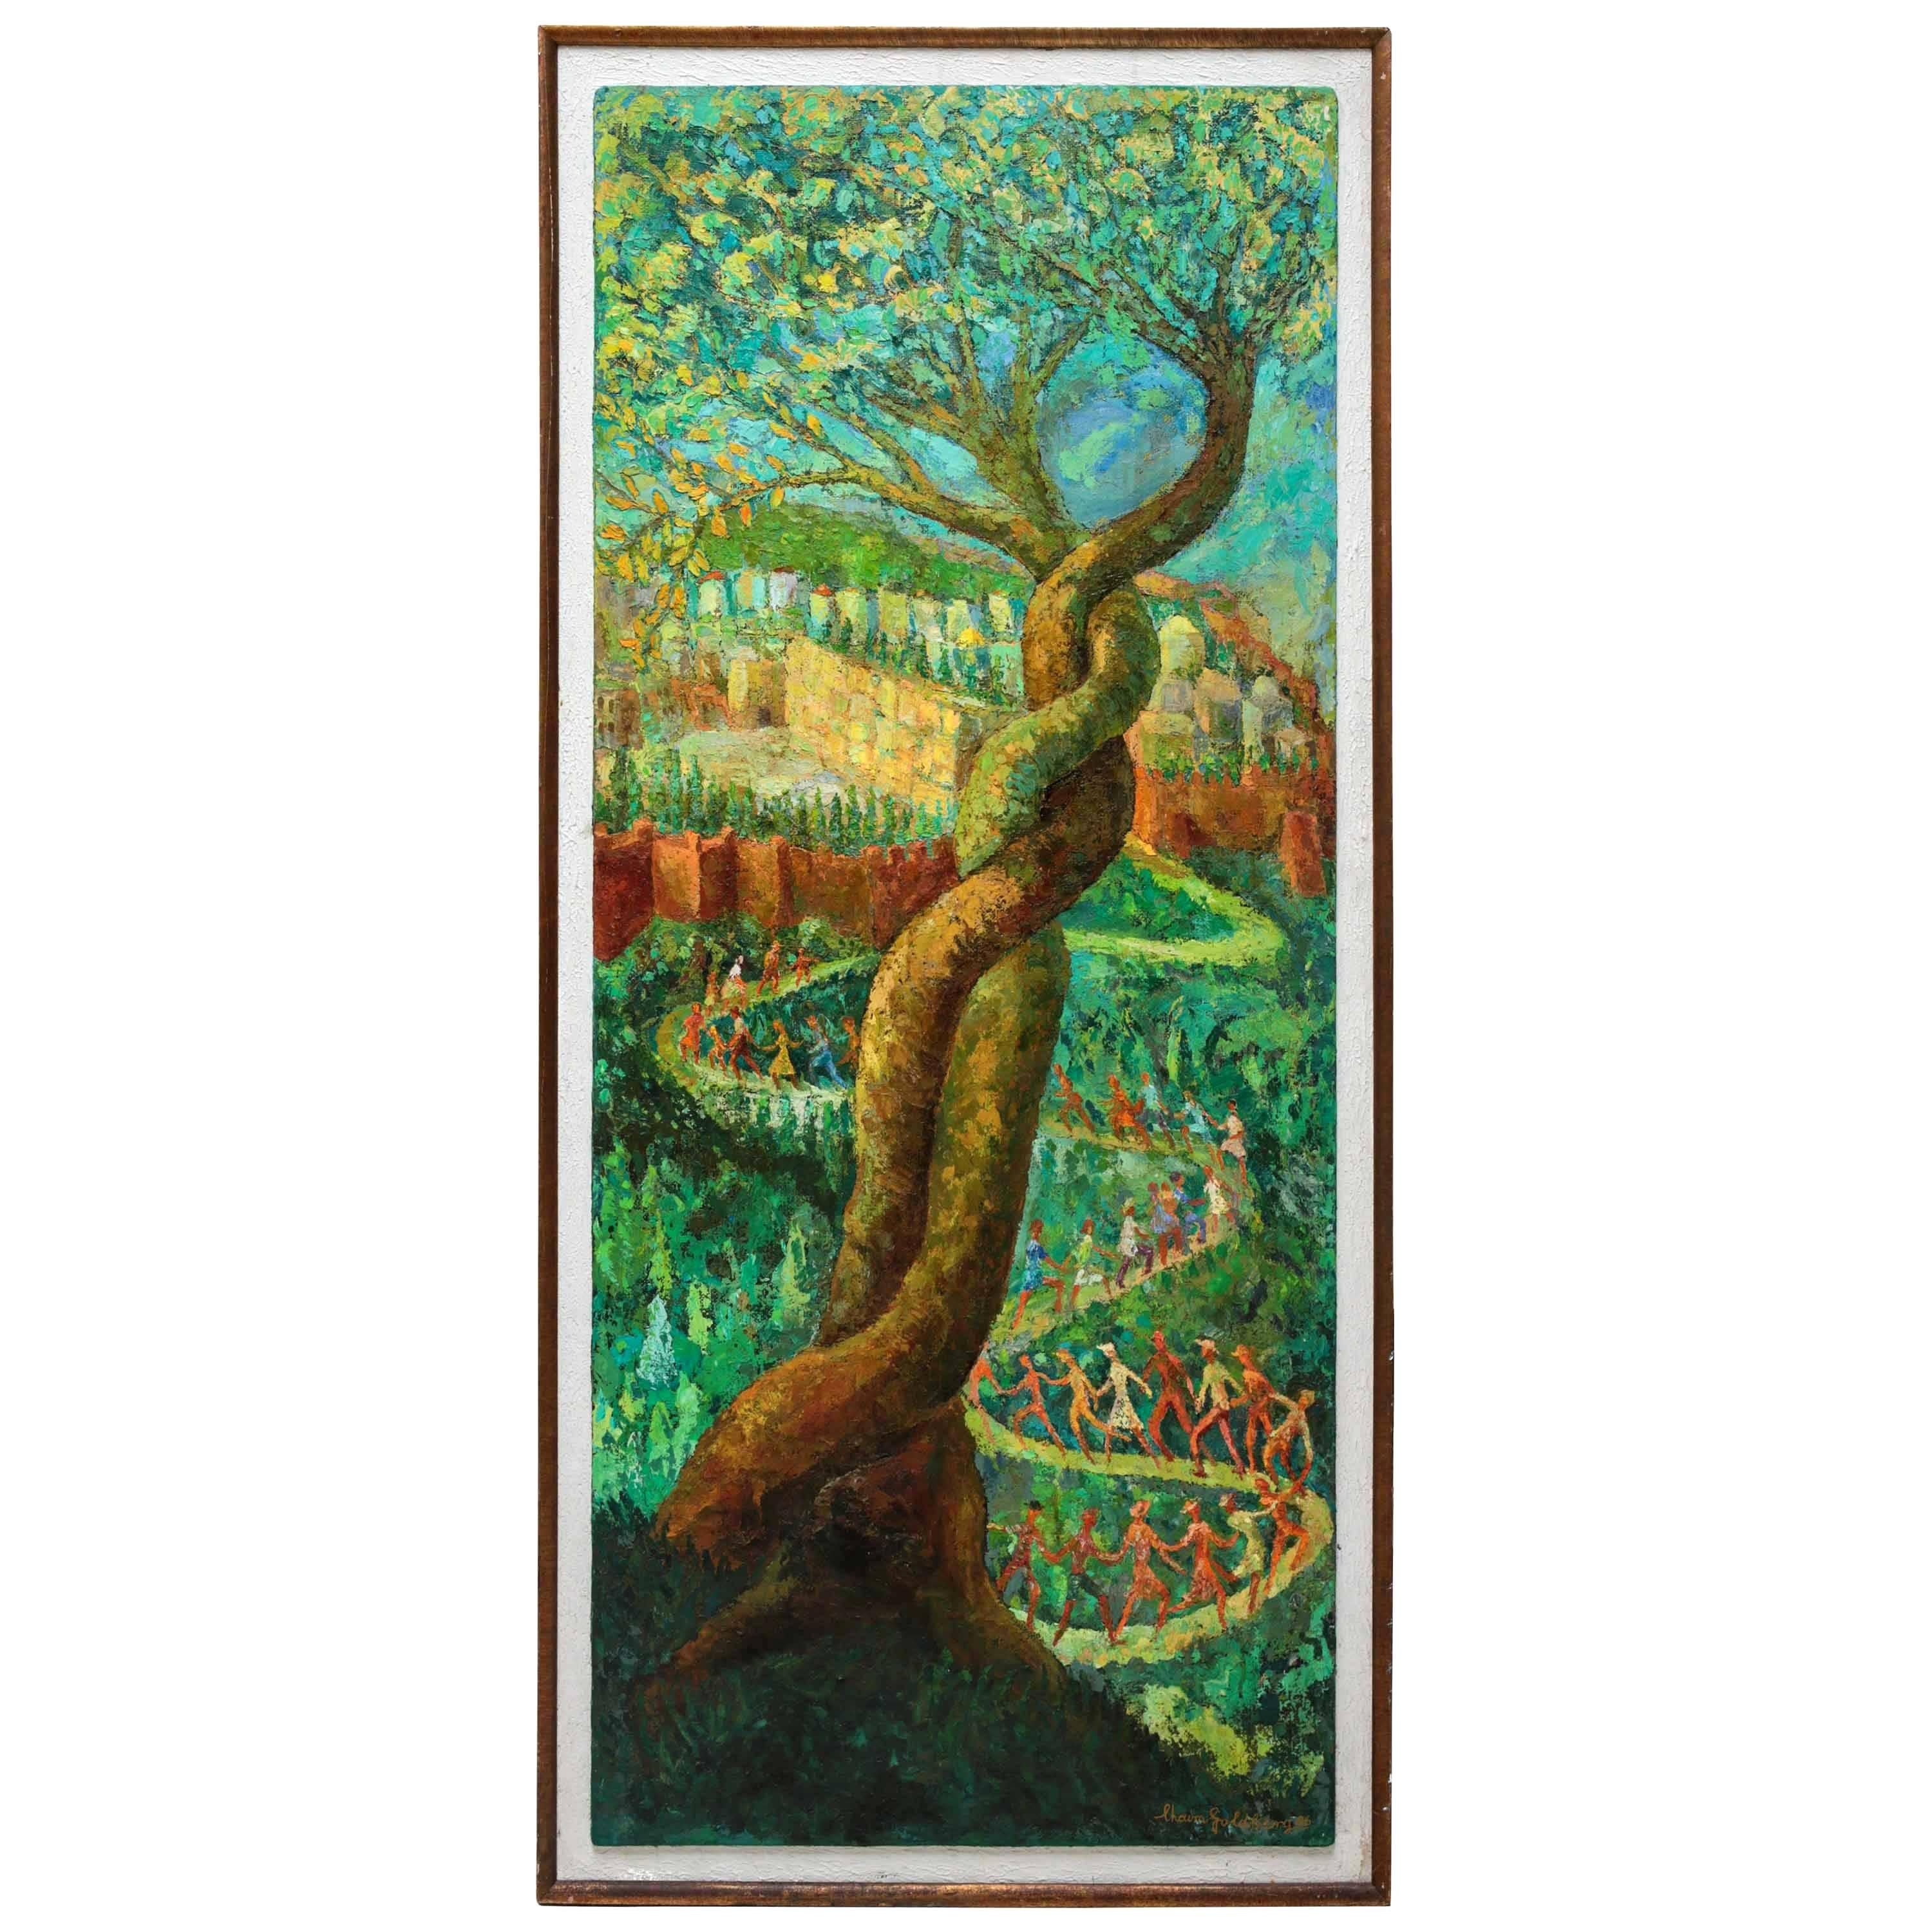 Large Post Expressionist Oil Painting "Oh Jerusalem" by Chaim Goldberg For Sale